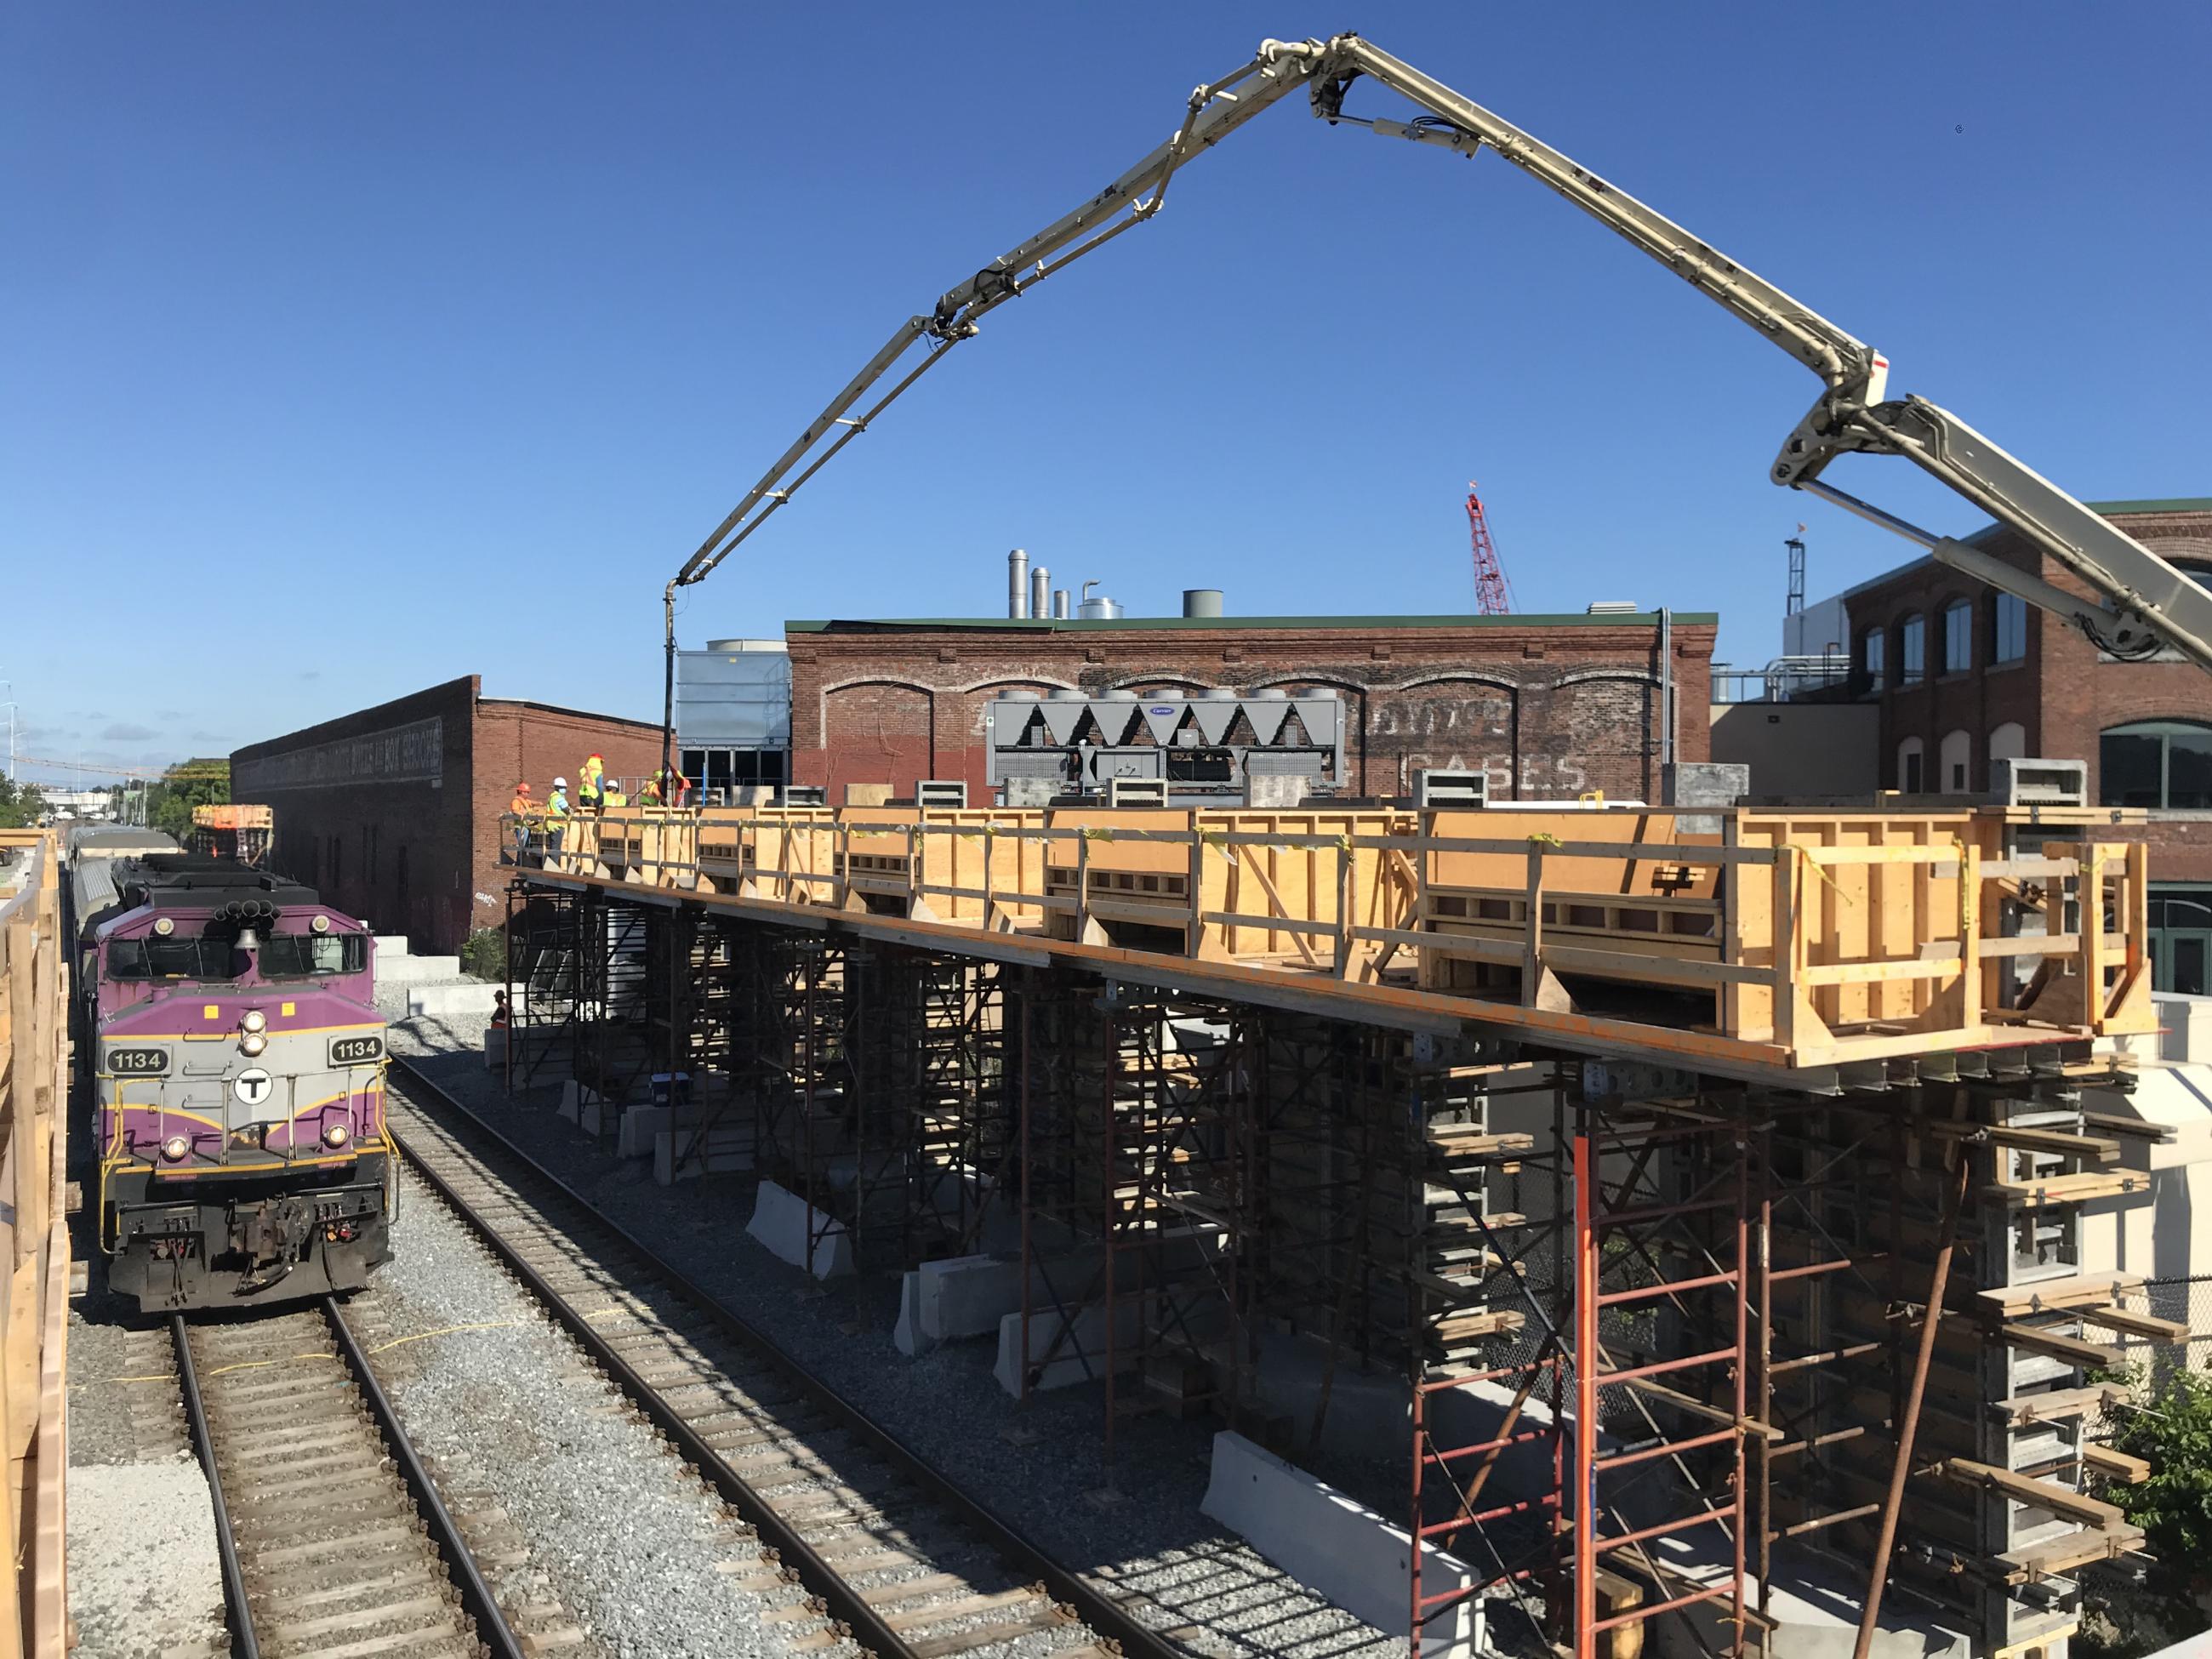 The new walls for the inbound platform are installed at Chelsea Commuter Rail Station